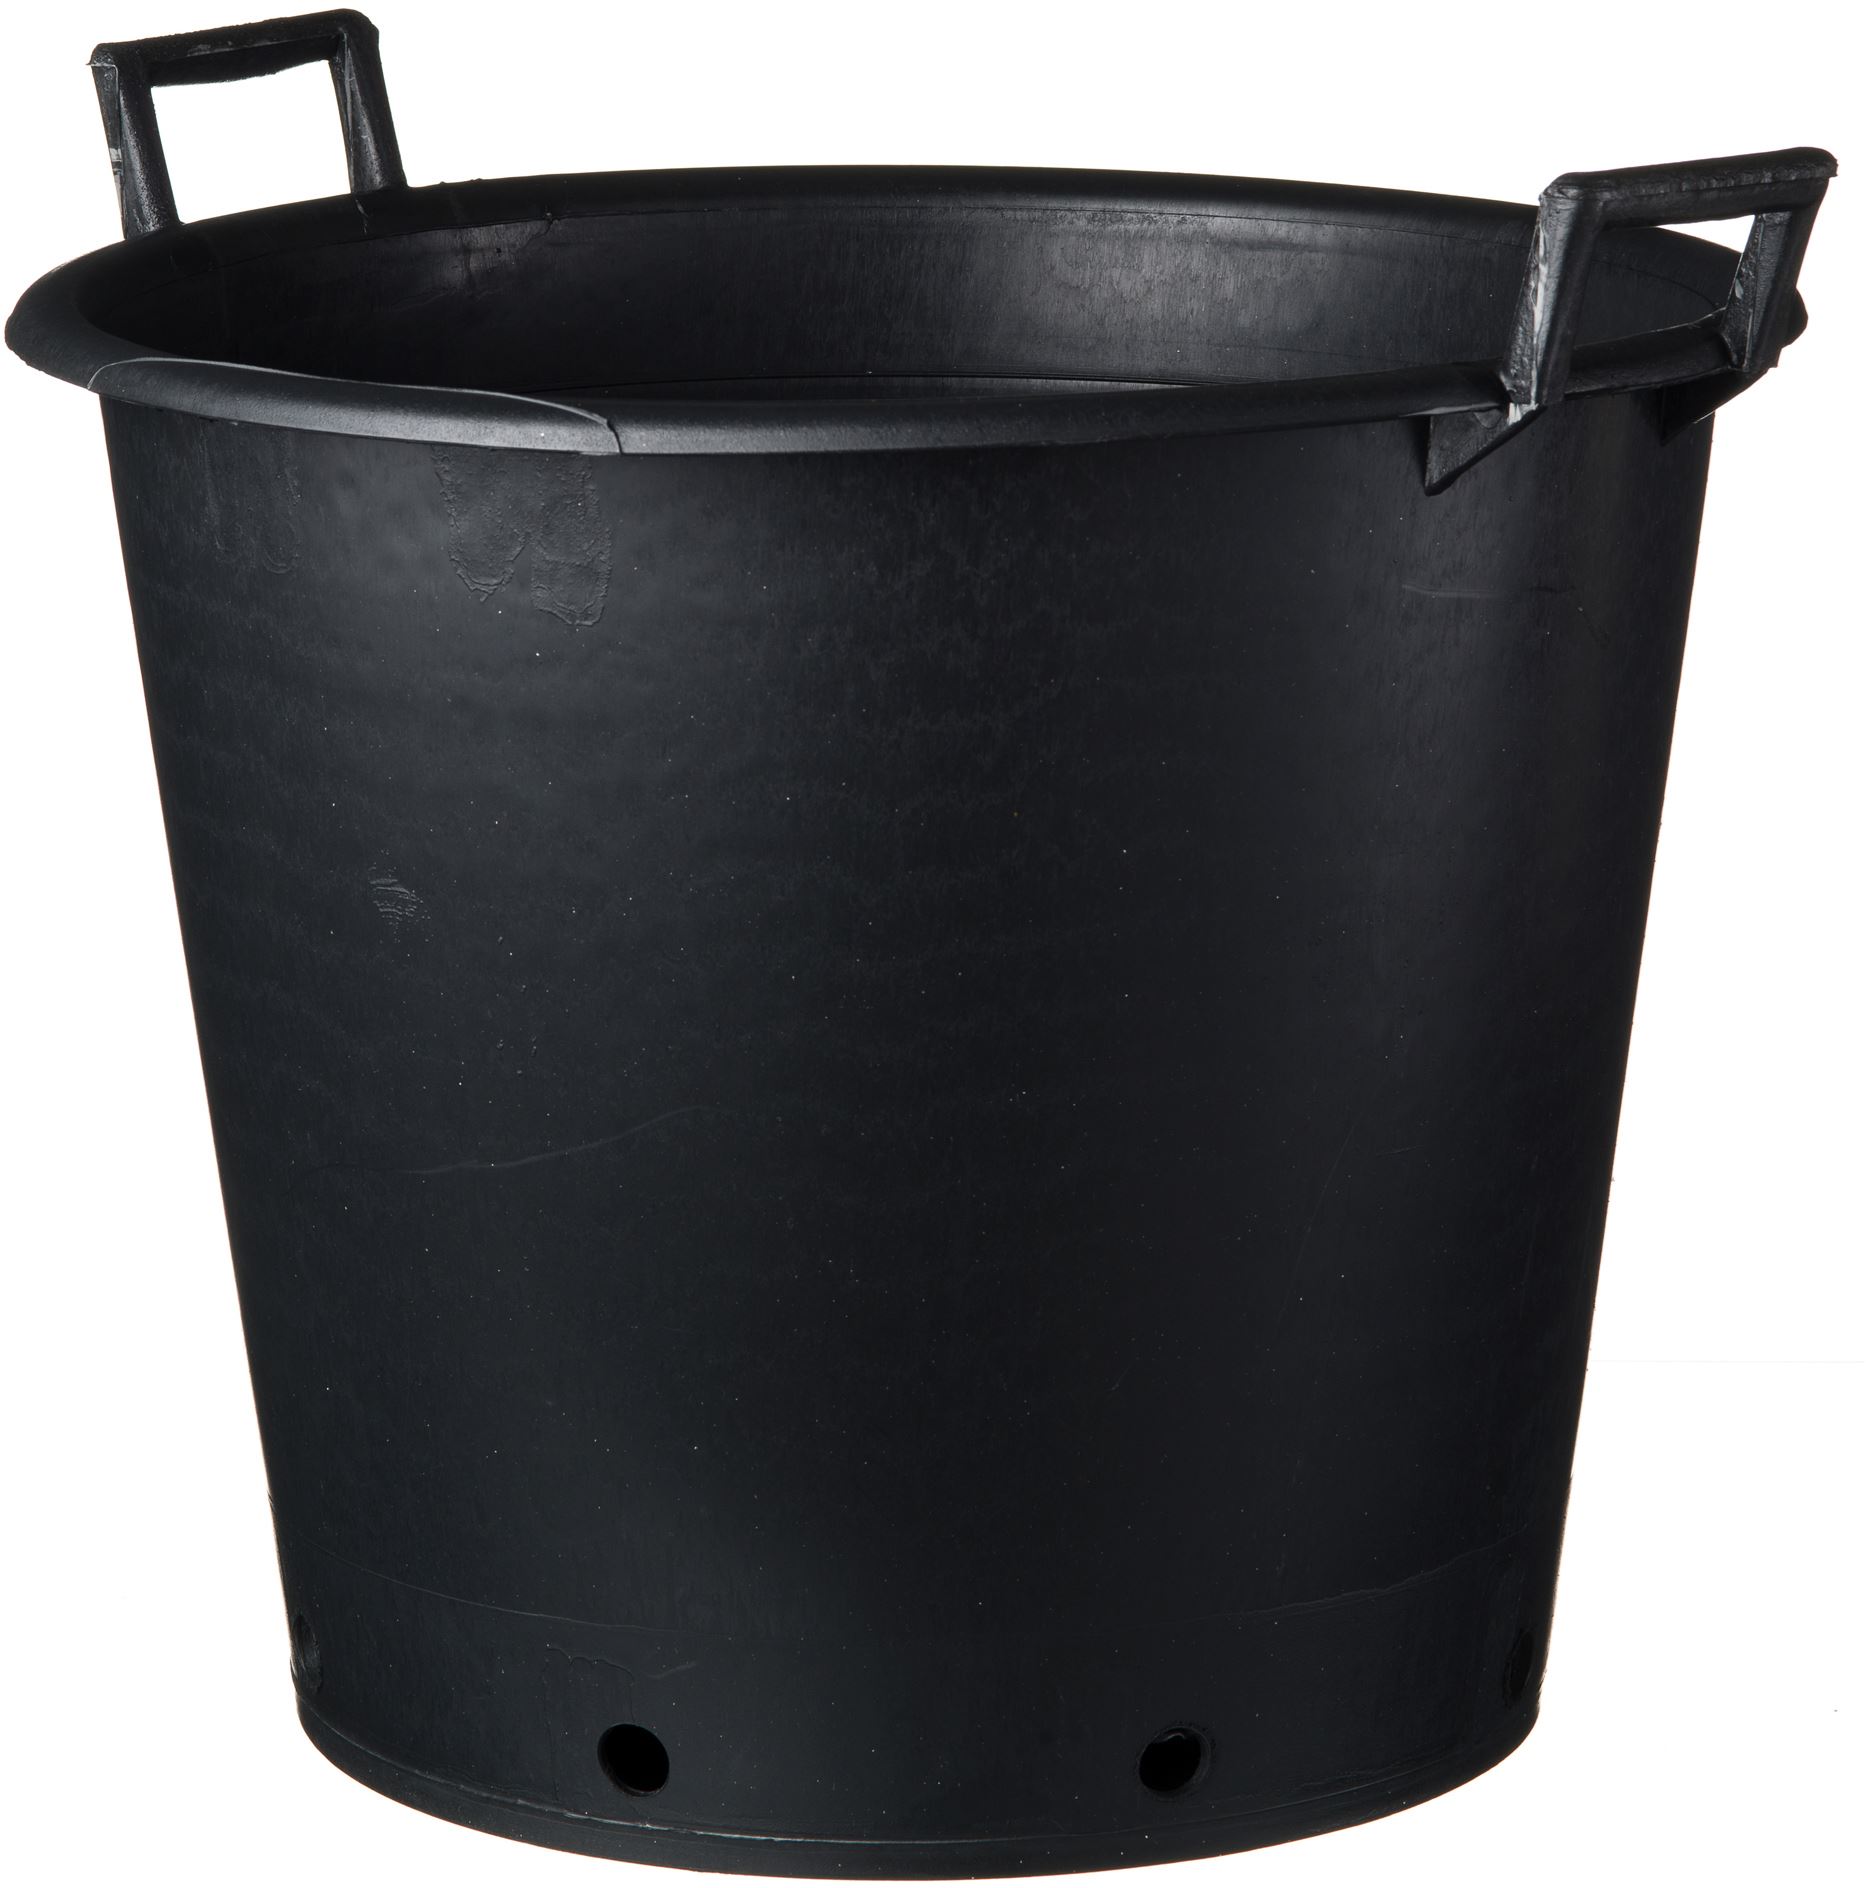 Nature Ritzi container 50l + handles with drainage openings - Plant container